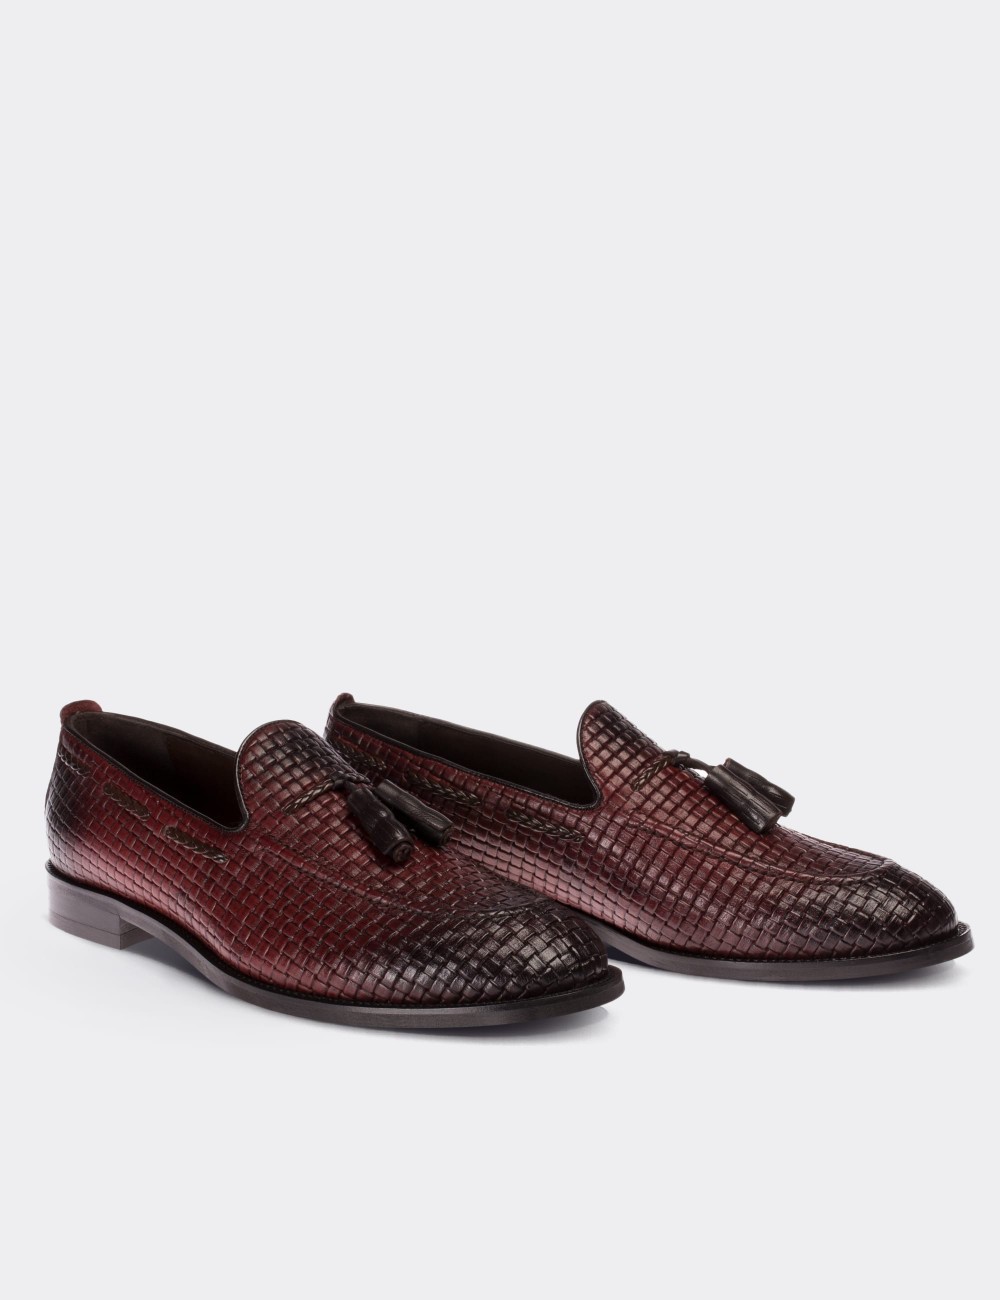 Burgundy  Leather Loafers - 01642MBRDM02